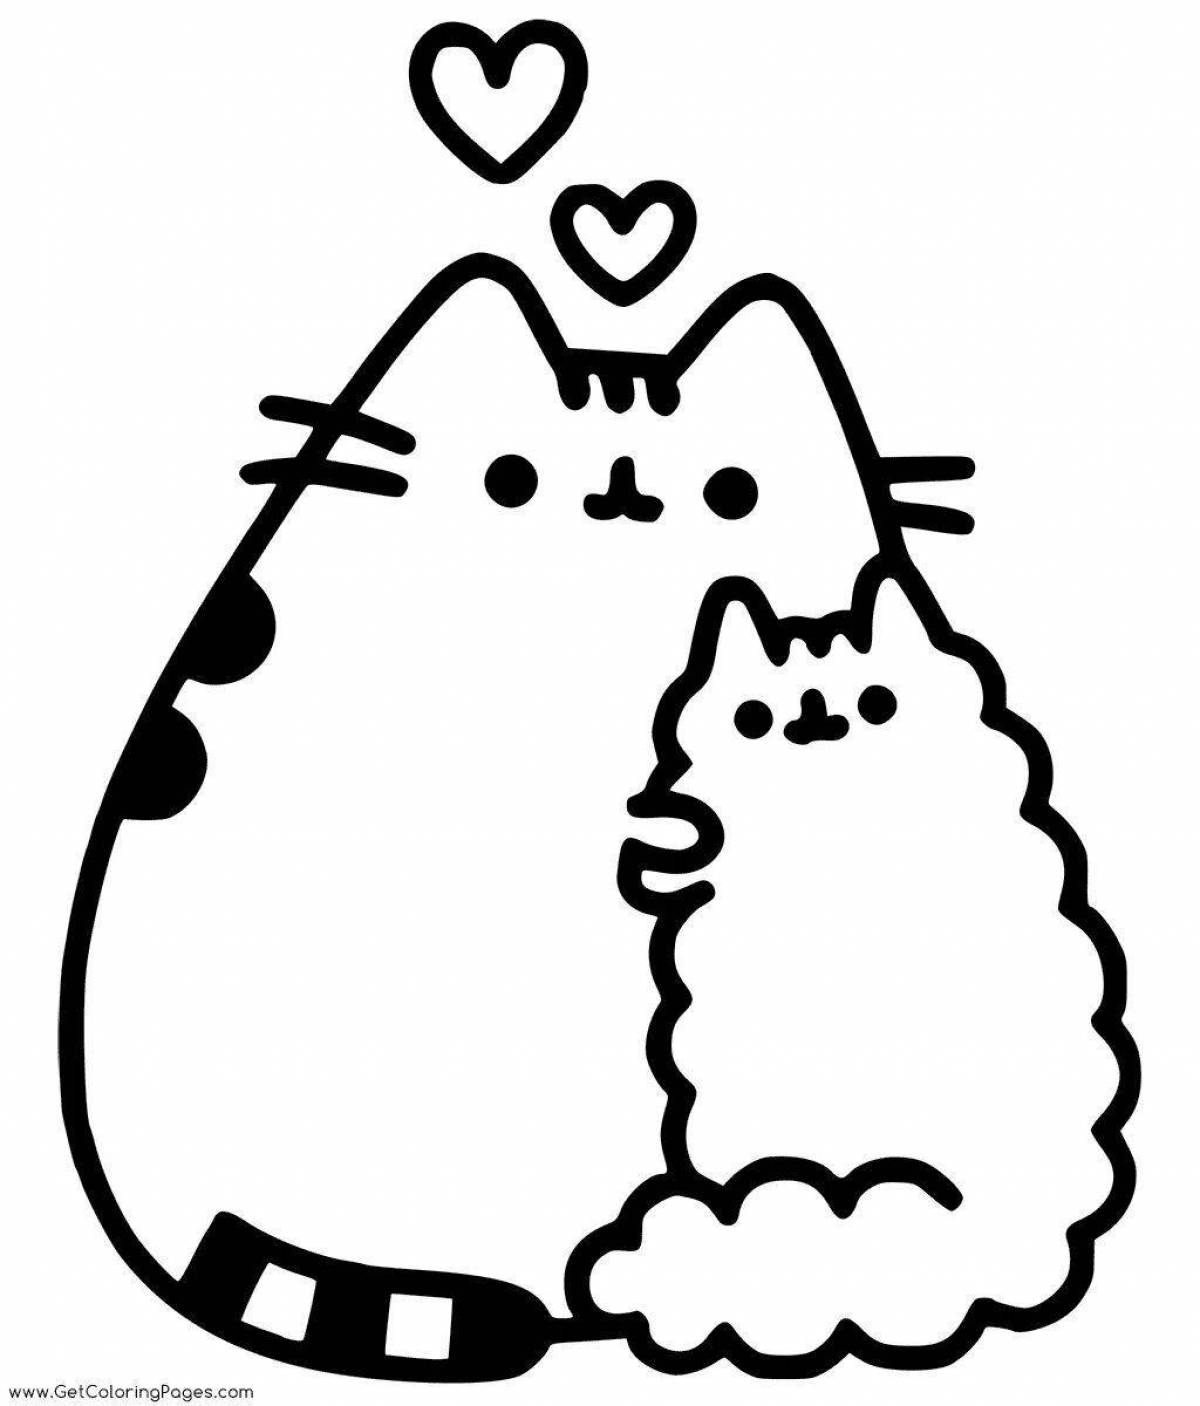 Coloring page cozy chubby cat